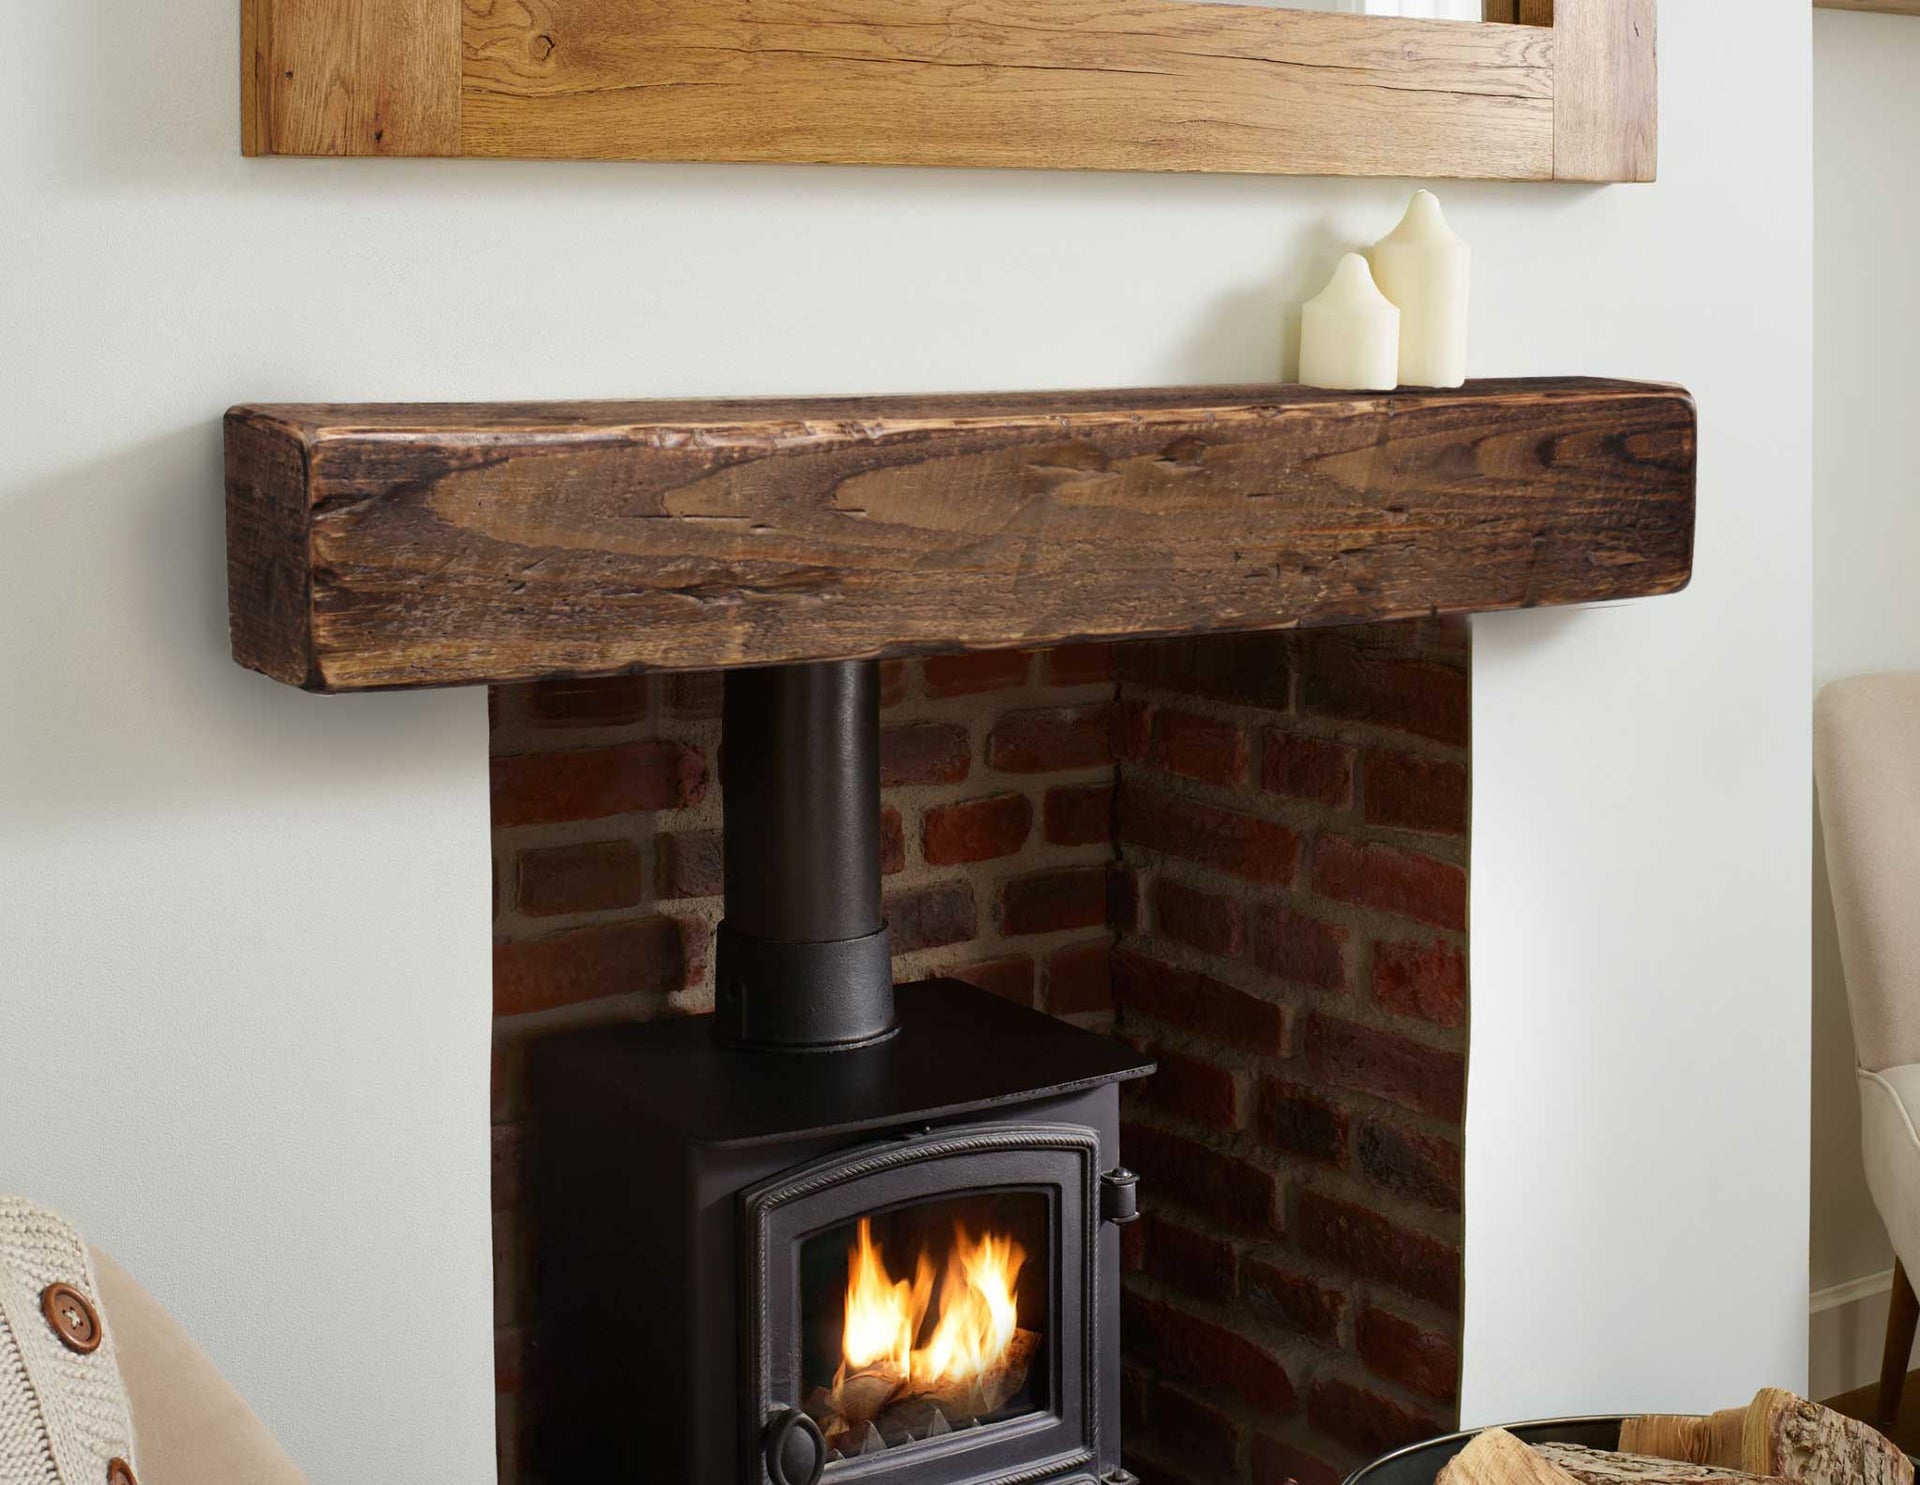 Top 5 Accessories for Your Fireplace Mantel